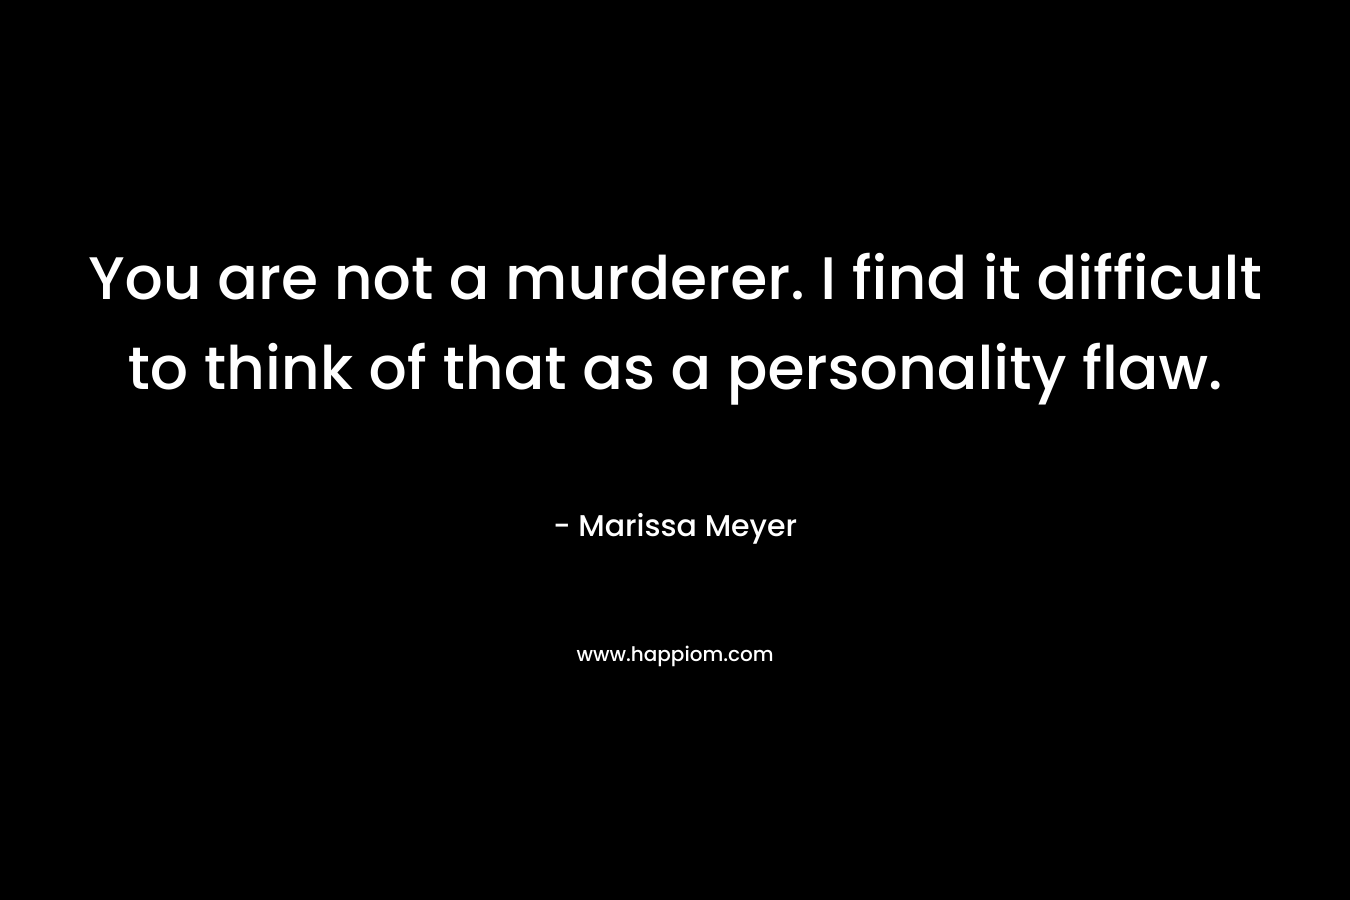 You are not a murderer. I find it difficult to think of that as a personality flaw.